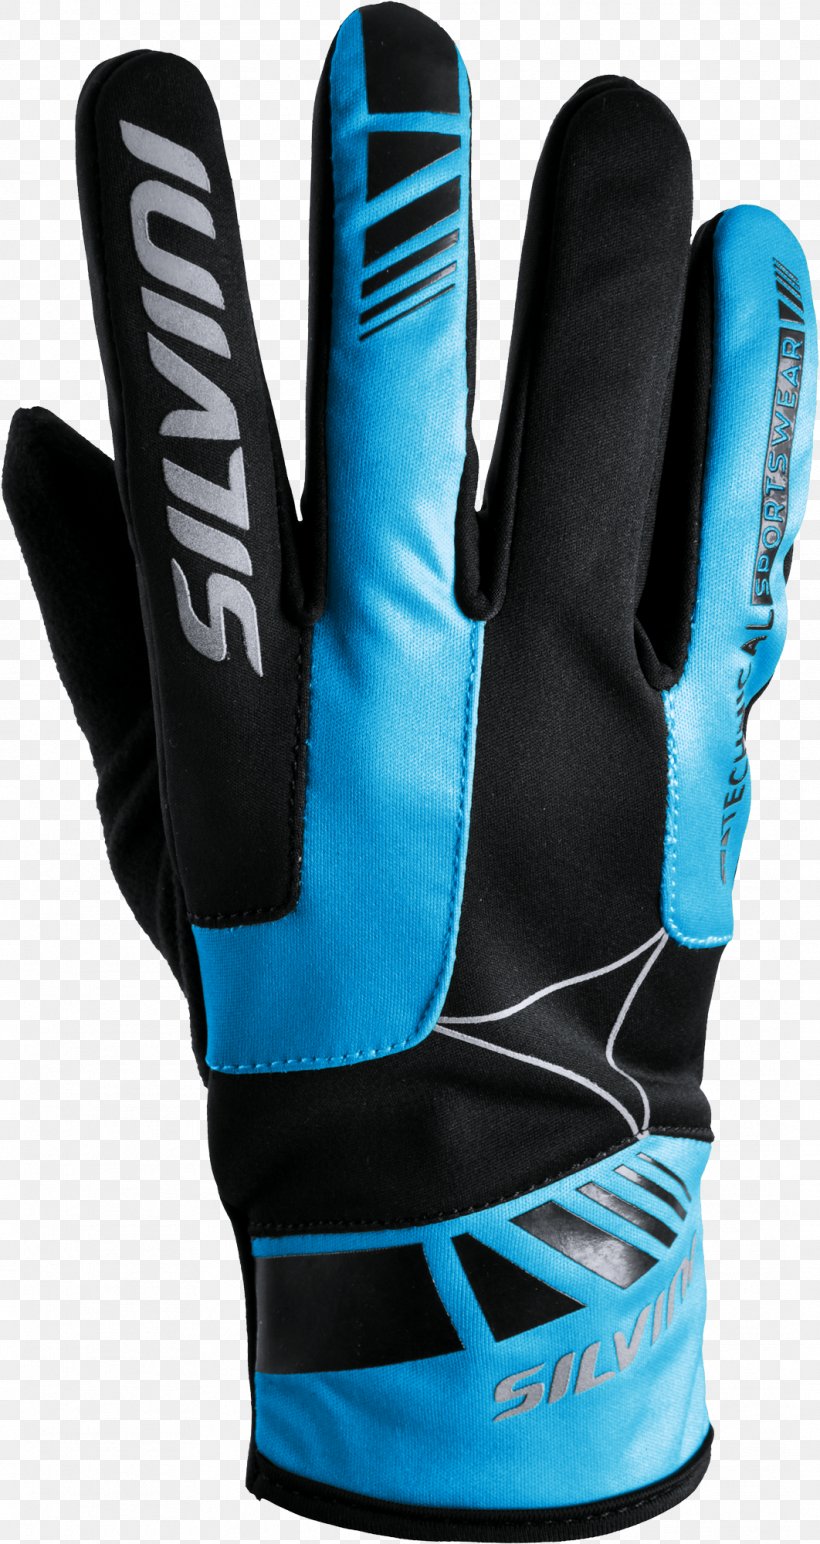 Bicycle Glove Lacrosse Glove Cycling Soccer Goalie Glove, PNG, 1062x2000px, Bicycle Glove, Baseball, Baseball Equipment, Baseball Protective Gear, Bicycle Download Free